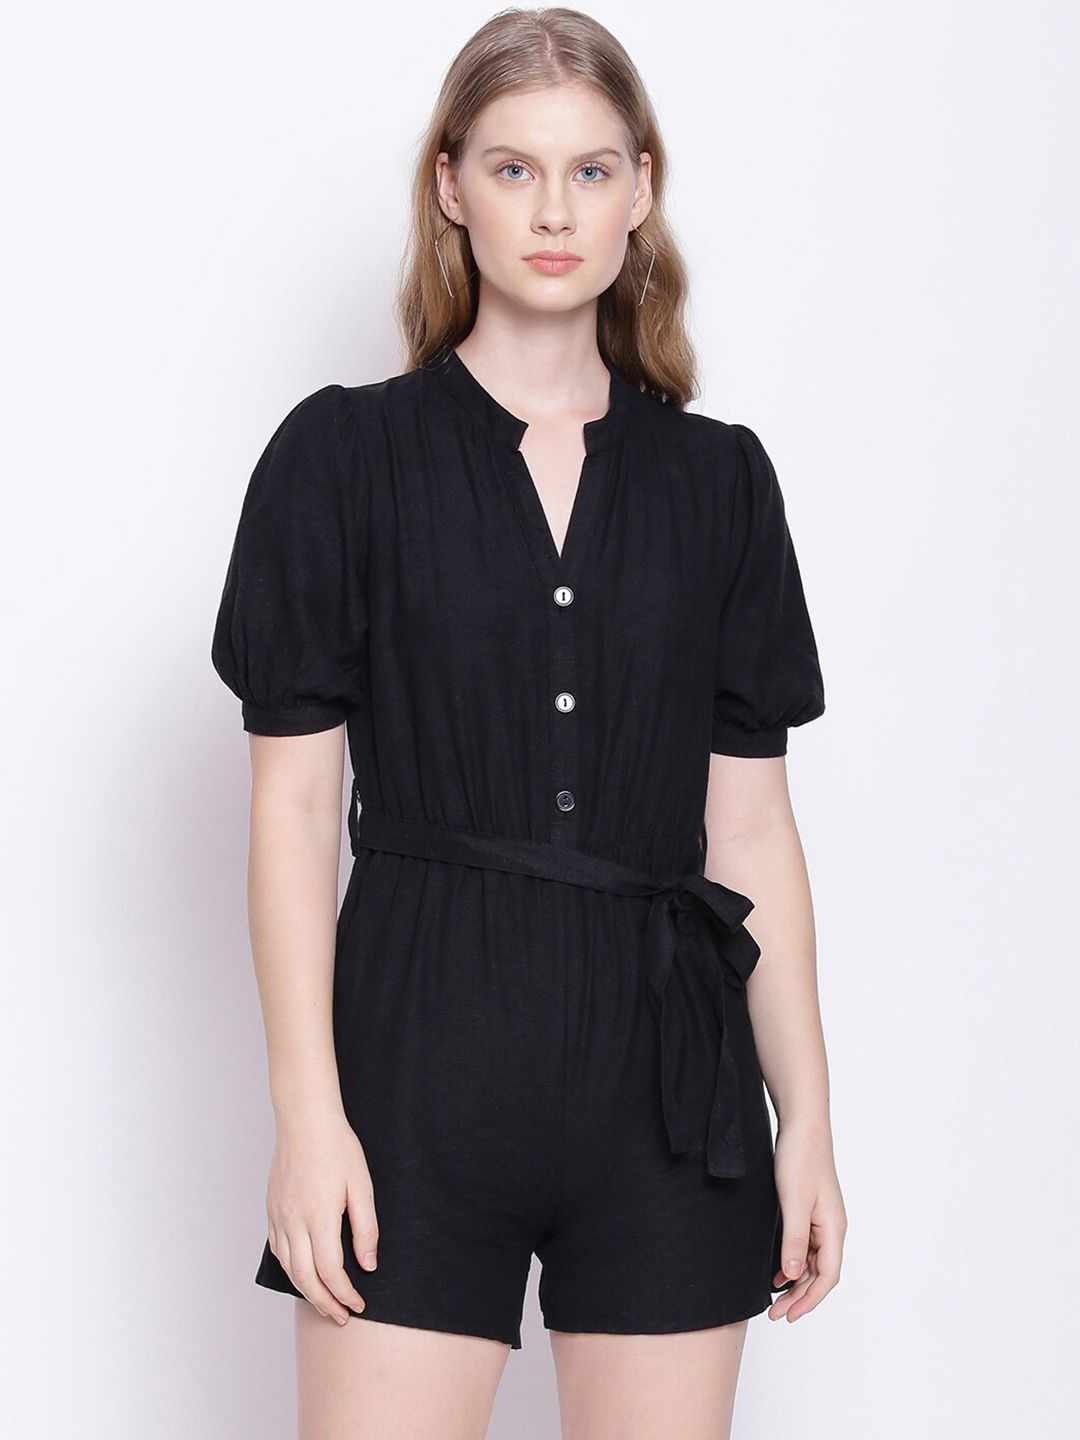 Oxolloxo Women Charcoal Black Linen Blend Playsuit Price in India